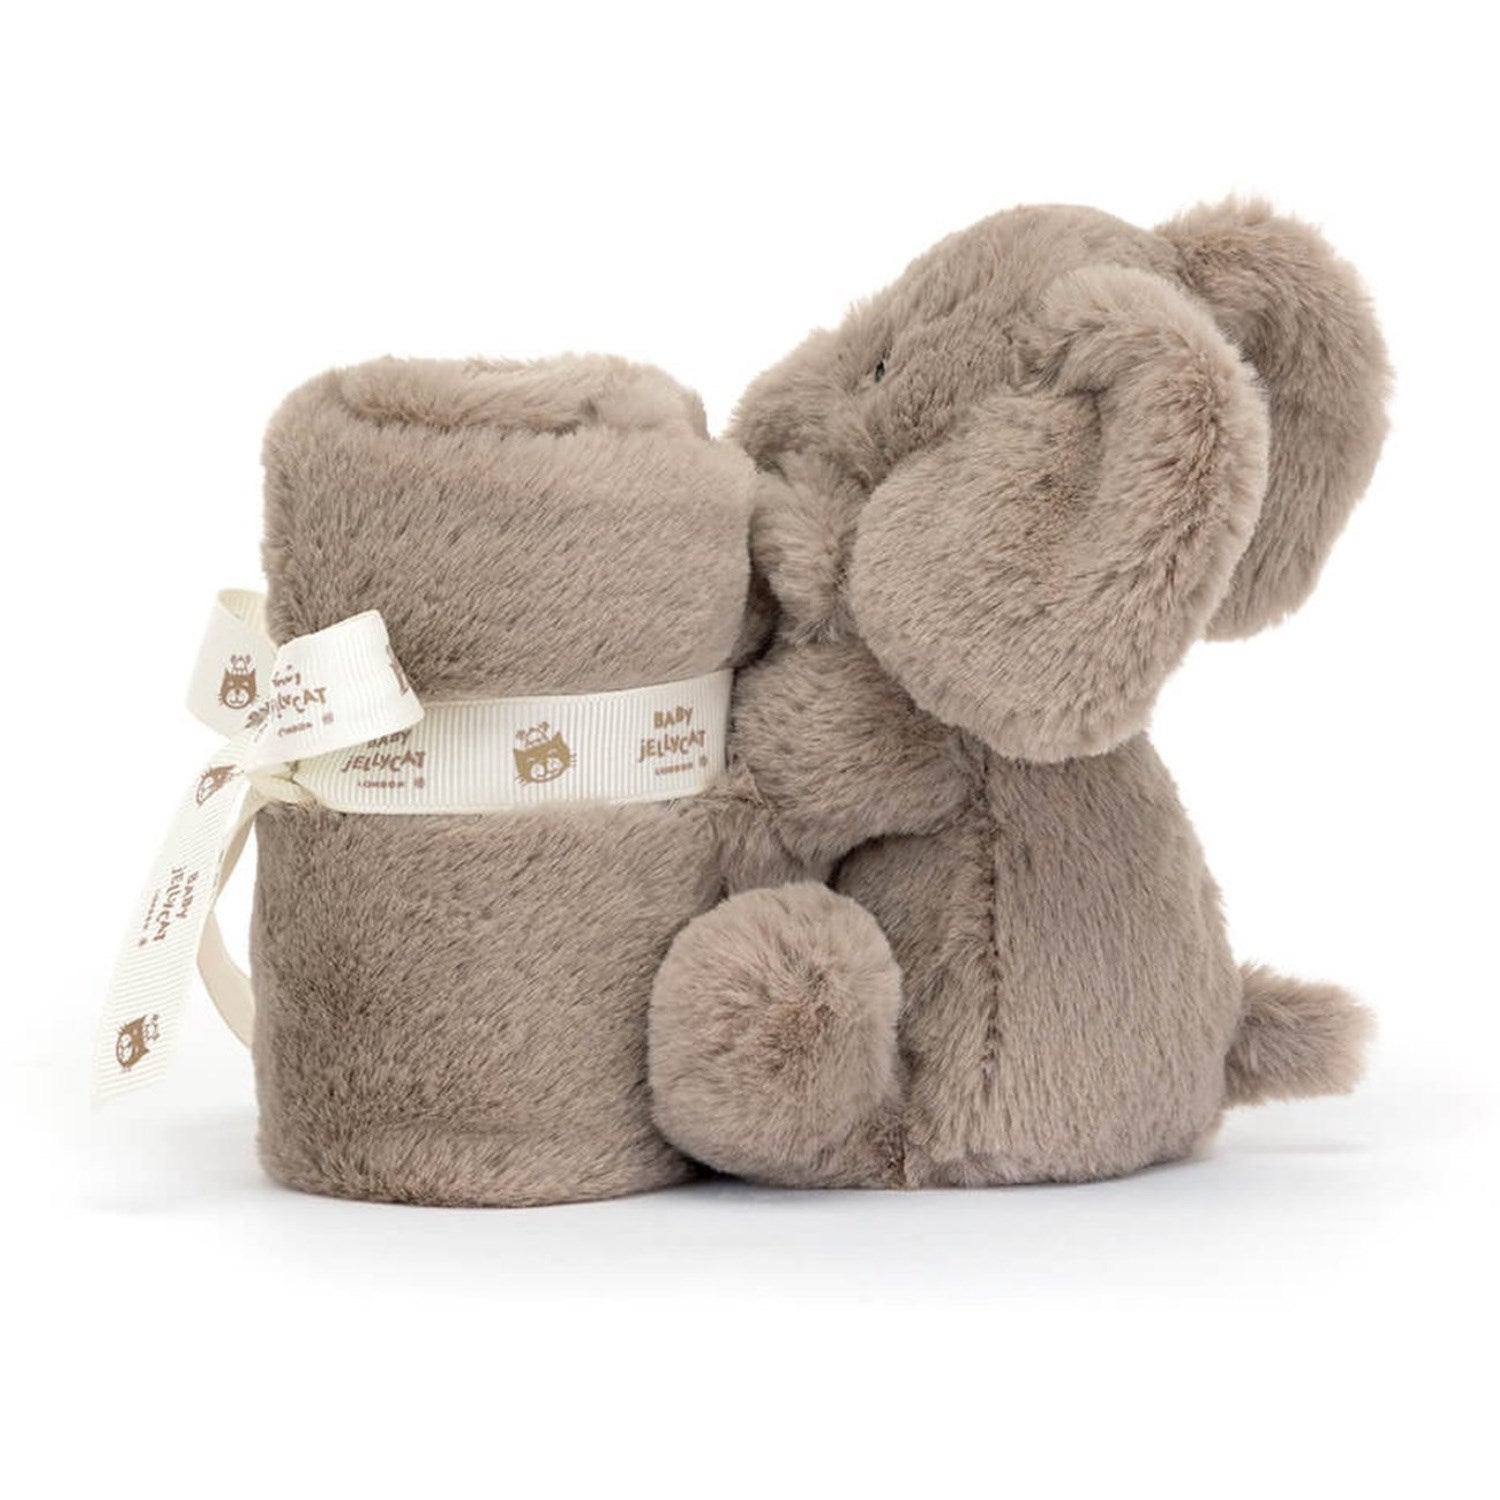 Jellycat Smudge Elephant Soother 4